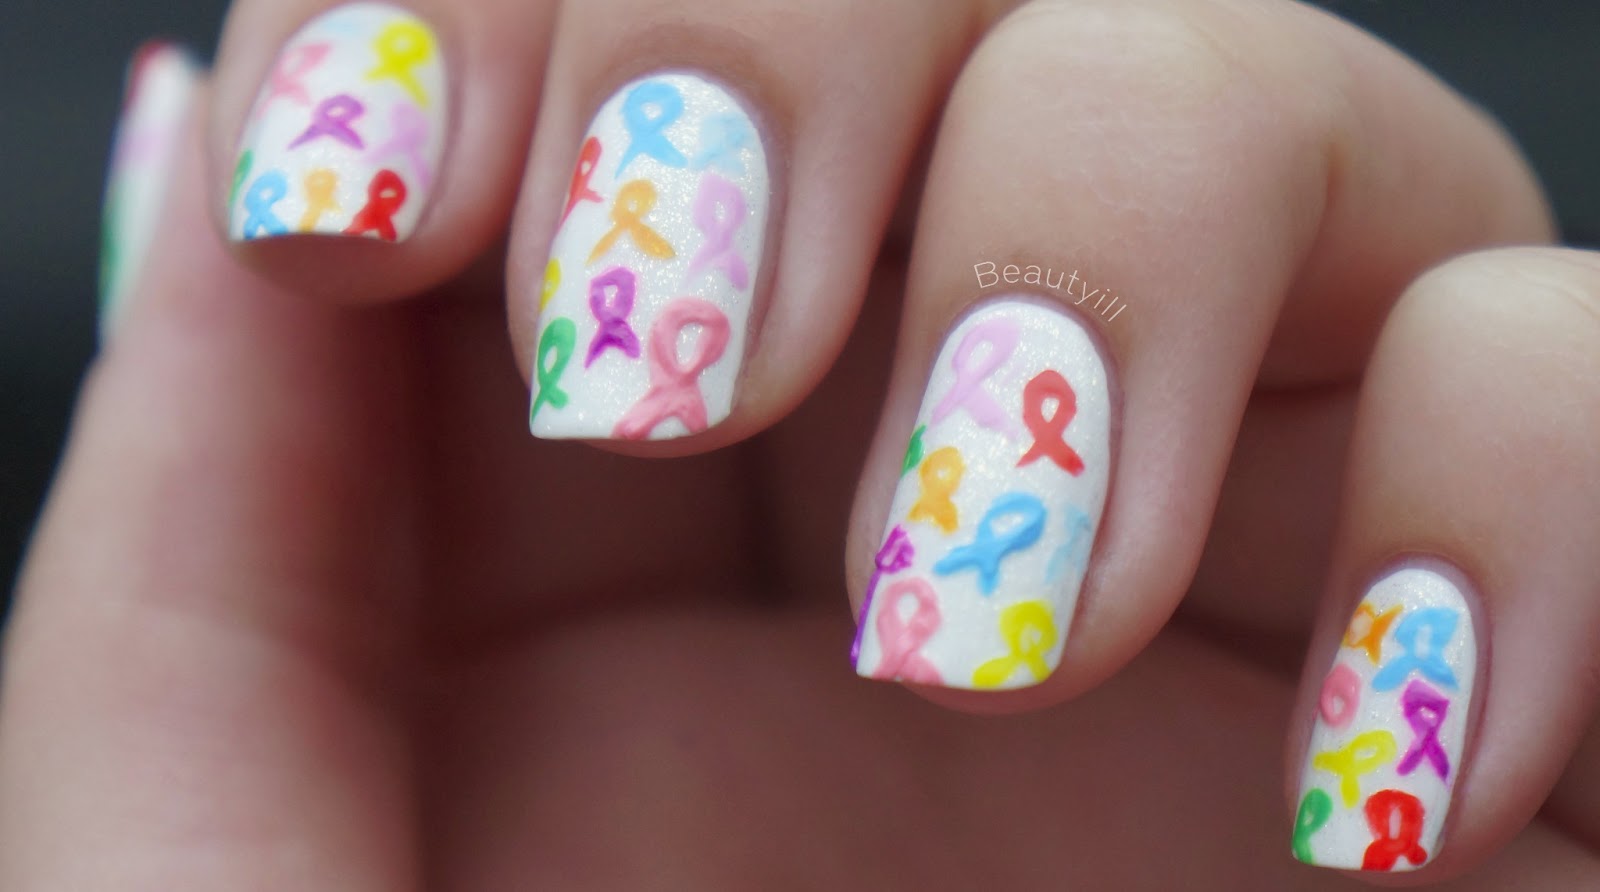 5. Nail Art for a Cause: 7 Creative Designs to Raise Awareness - wide 6